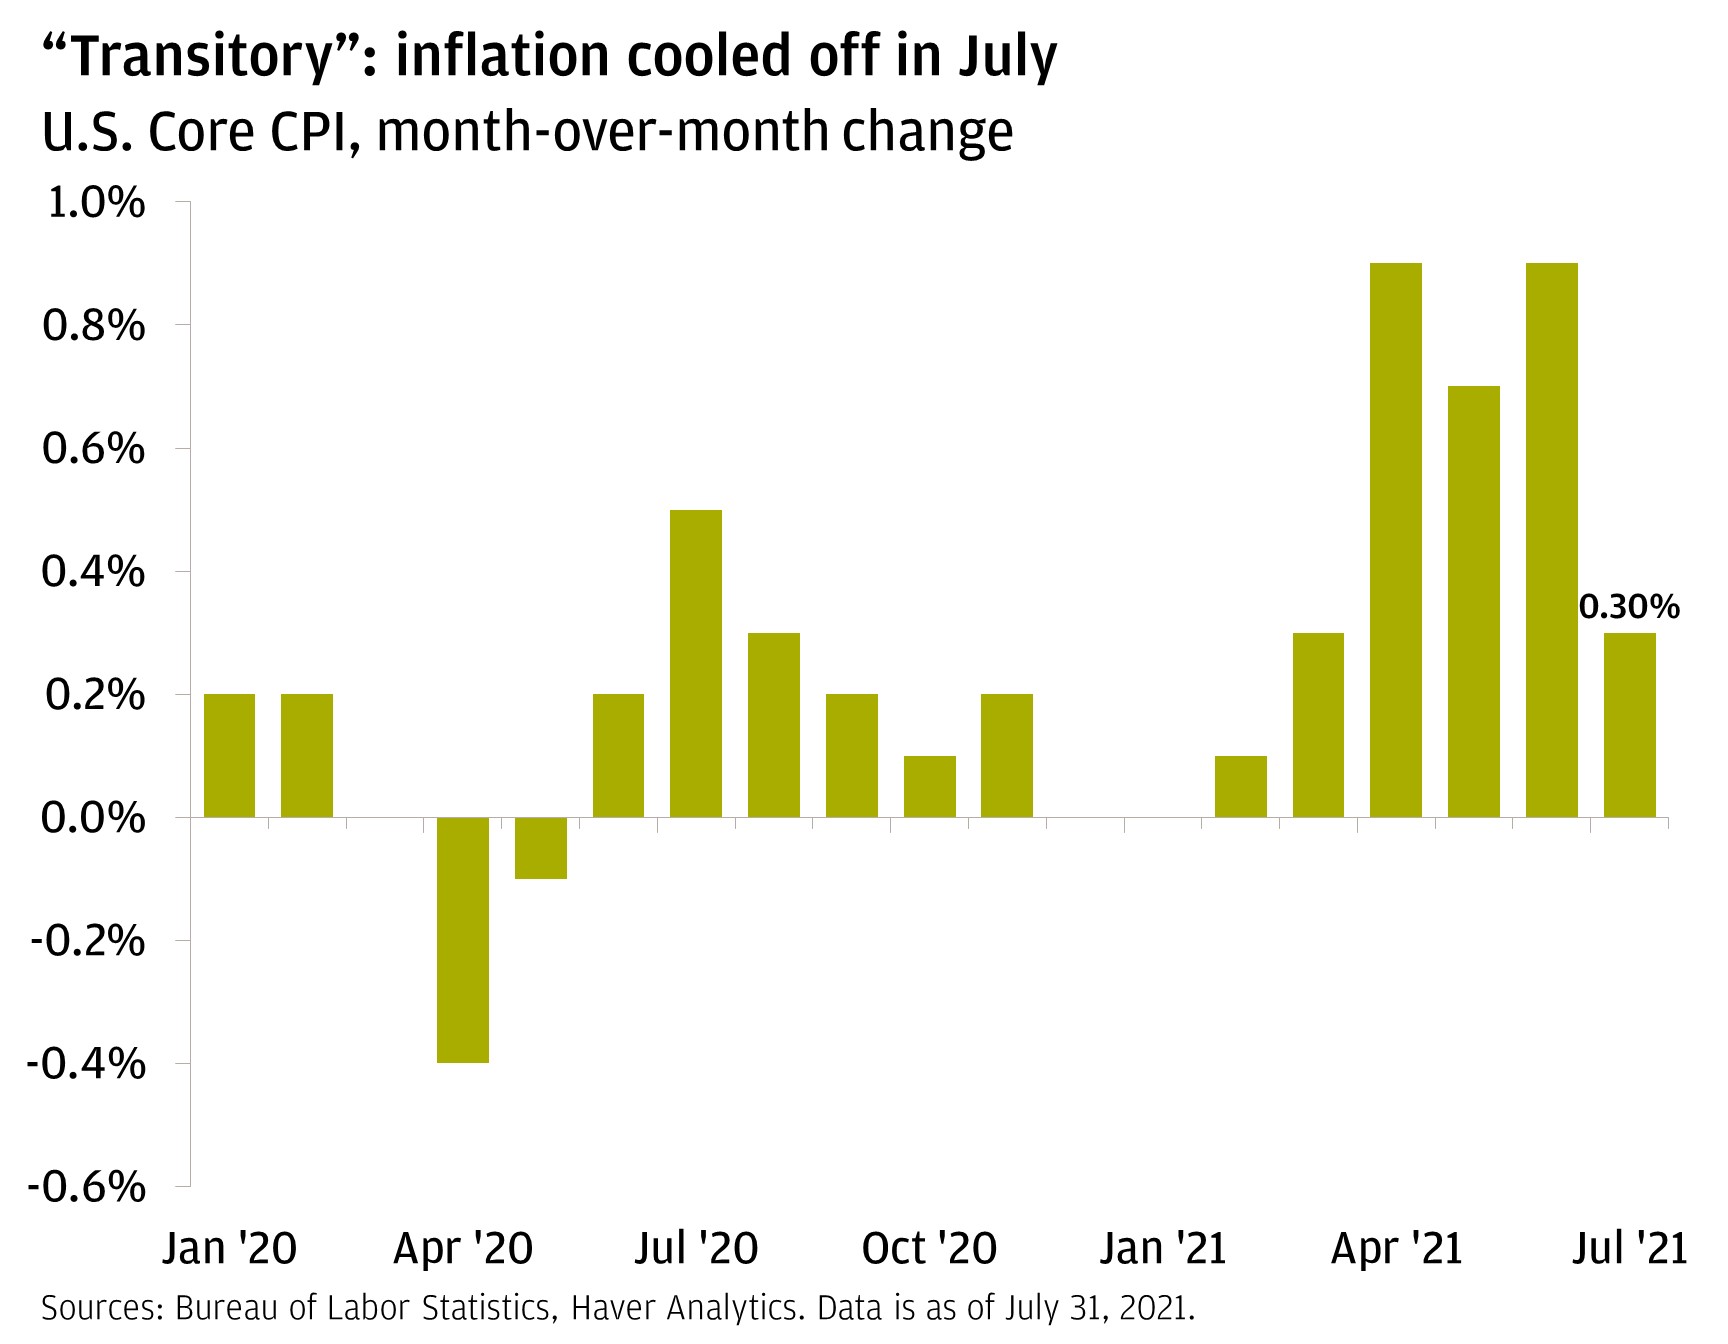 This chart shows the month-over-month change in the U.S. Core Consumer Price Index from January 2020 through July 2021. In both January and February 2020, the month-over-month change in CPI was 0.2%. It was 0% in March 2020, then -0.4% in April 2020 as the pandemic prompted economic shutdowns. In May 2020, it ticked up slightly to -0.1%, then to 0.2% in June 2020. In July 2020, it was 0.5%, then 0.3% in August 2020. September and October 2020 saw changes of 0.2% and 0.1%, respectively. November 2020 saw a tick back up to 0.2%, and December 2020 brought no change (0%).   January 2021 again saw no change (0%), February 2021 saw 0.1%, and March 2021 0.3%. Inflation picked up more meaningfully in the spring, rising to 0.9% in April 2021, 0.7% in May 2021, and 0.9% in June 2021. The latest data print for July 2021 saw inflation cool off, coming in at 0.3%.